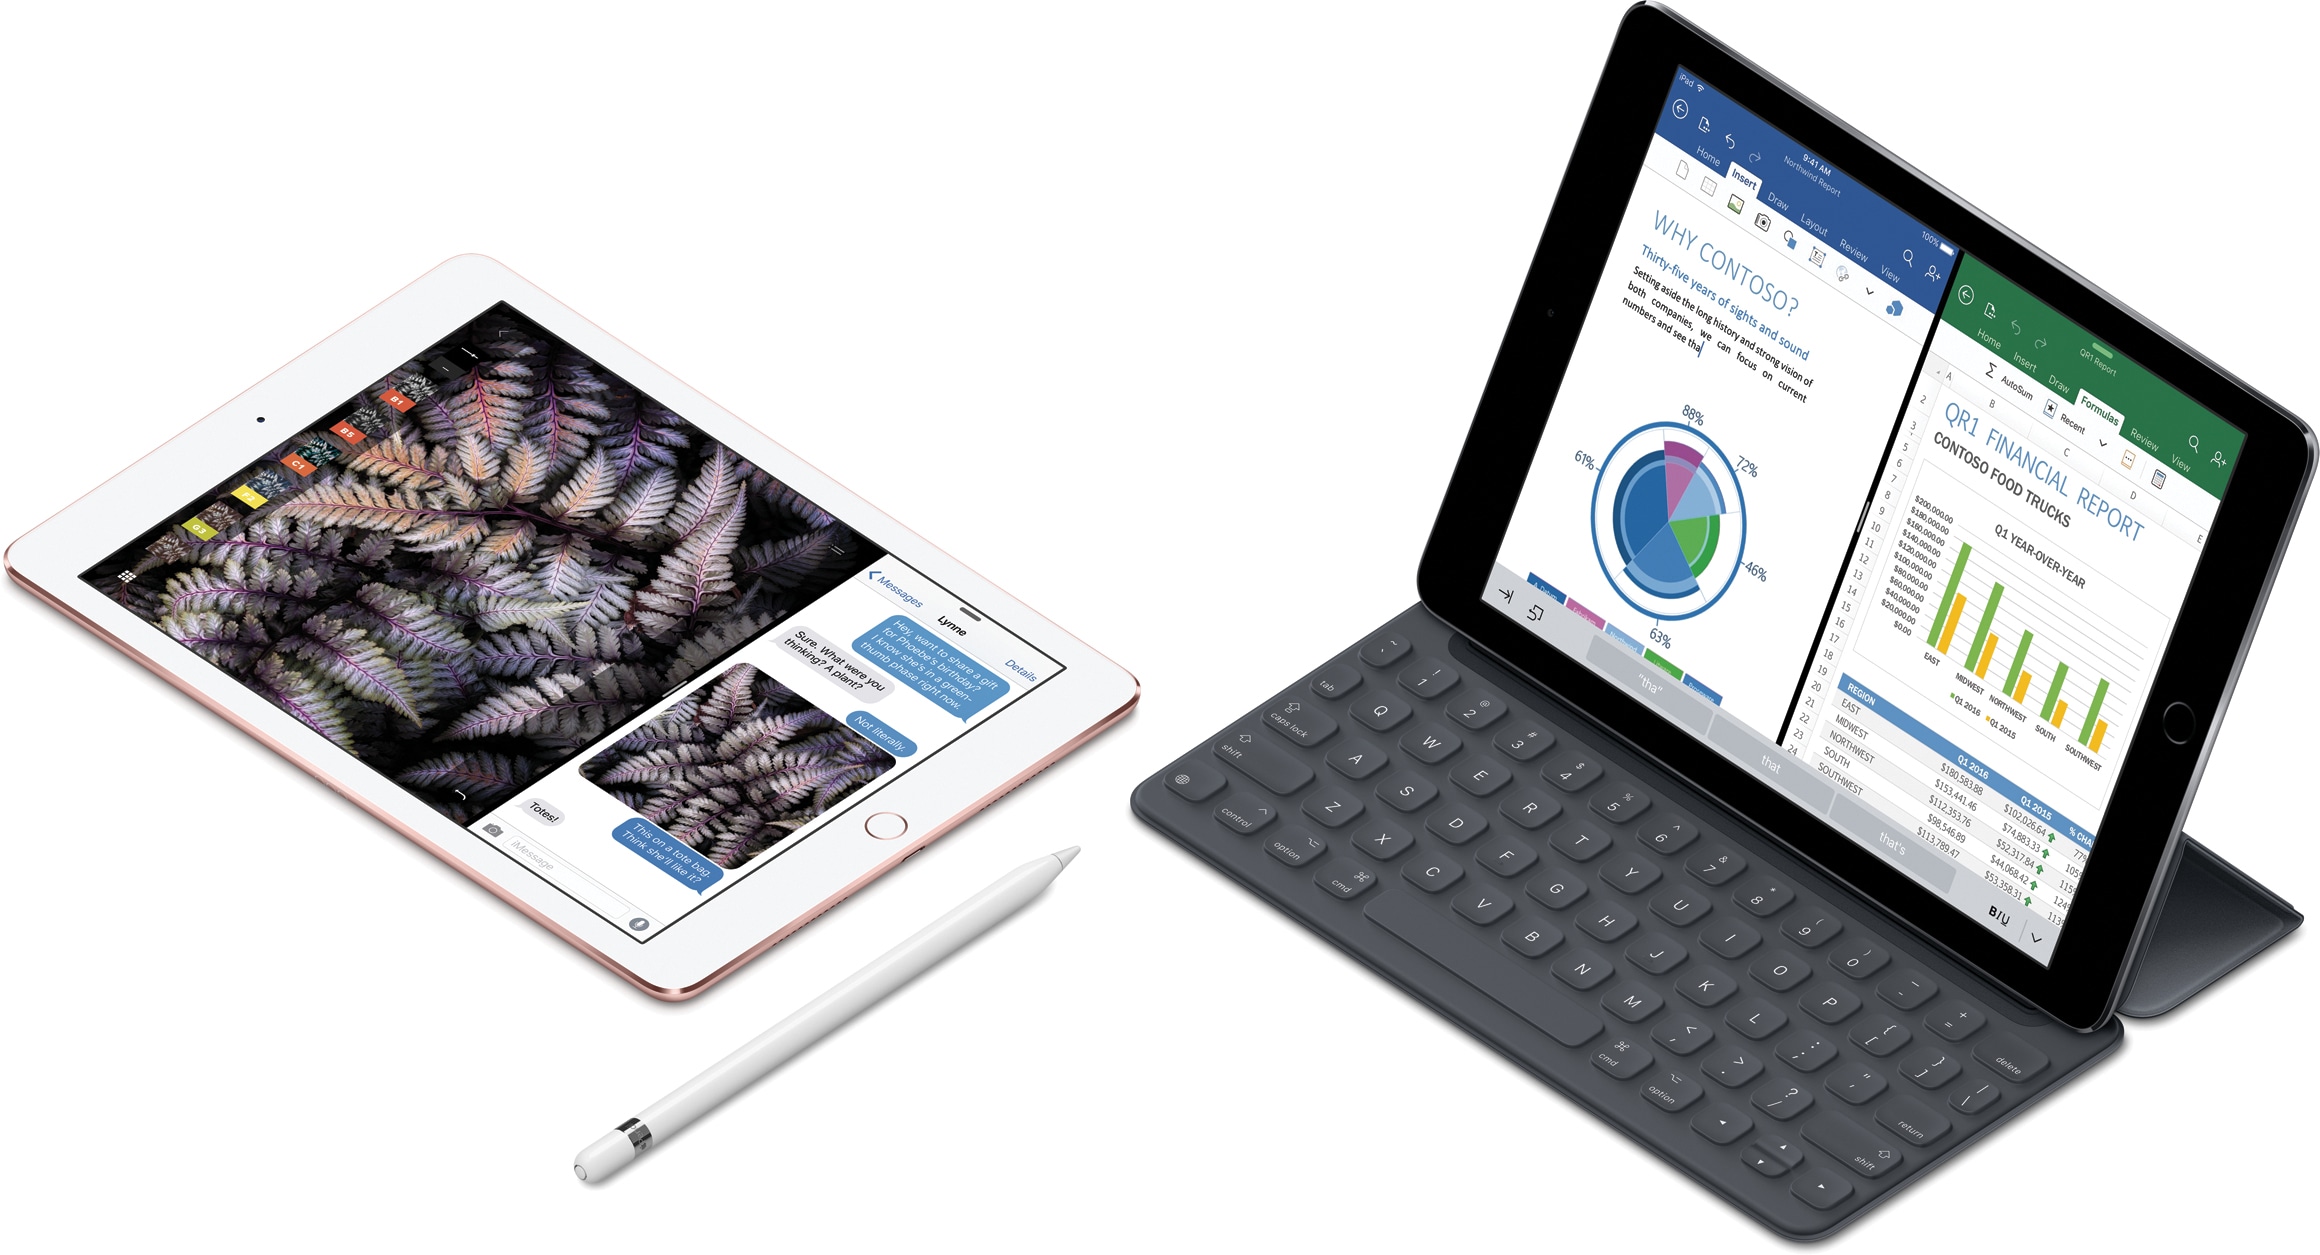 9.7-inch iPad Pro lying with Apple Pencil next to 12.9-inch iPad Pro with Smart Keyboard